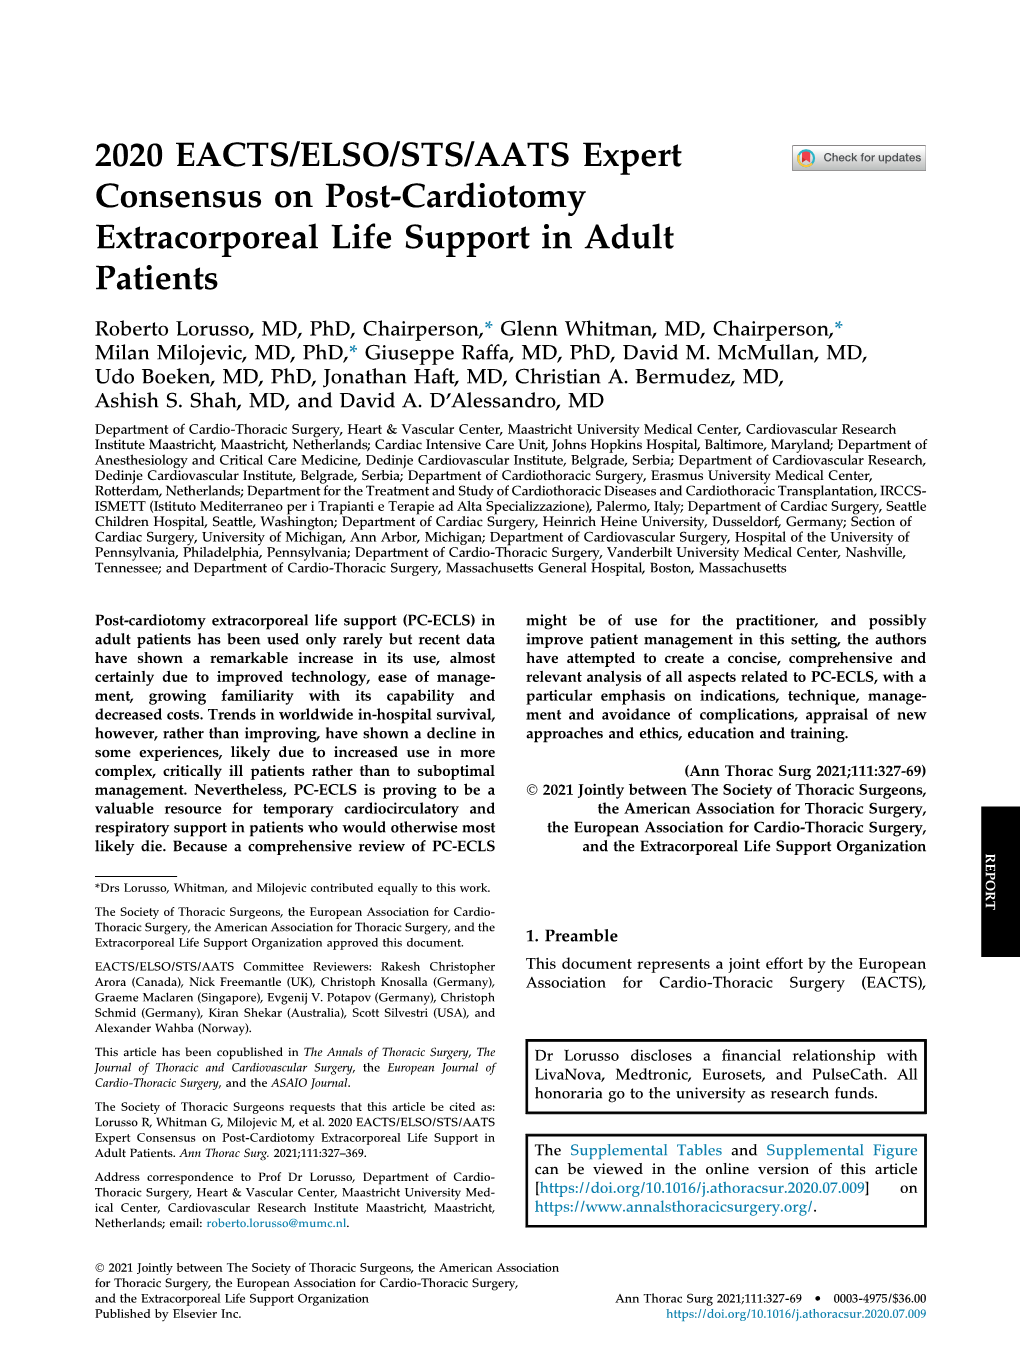 Expert Consensus on Post-Cardiotomy Extracorporeal Life Support in Adult Patients